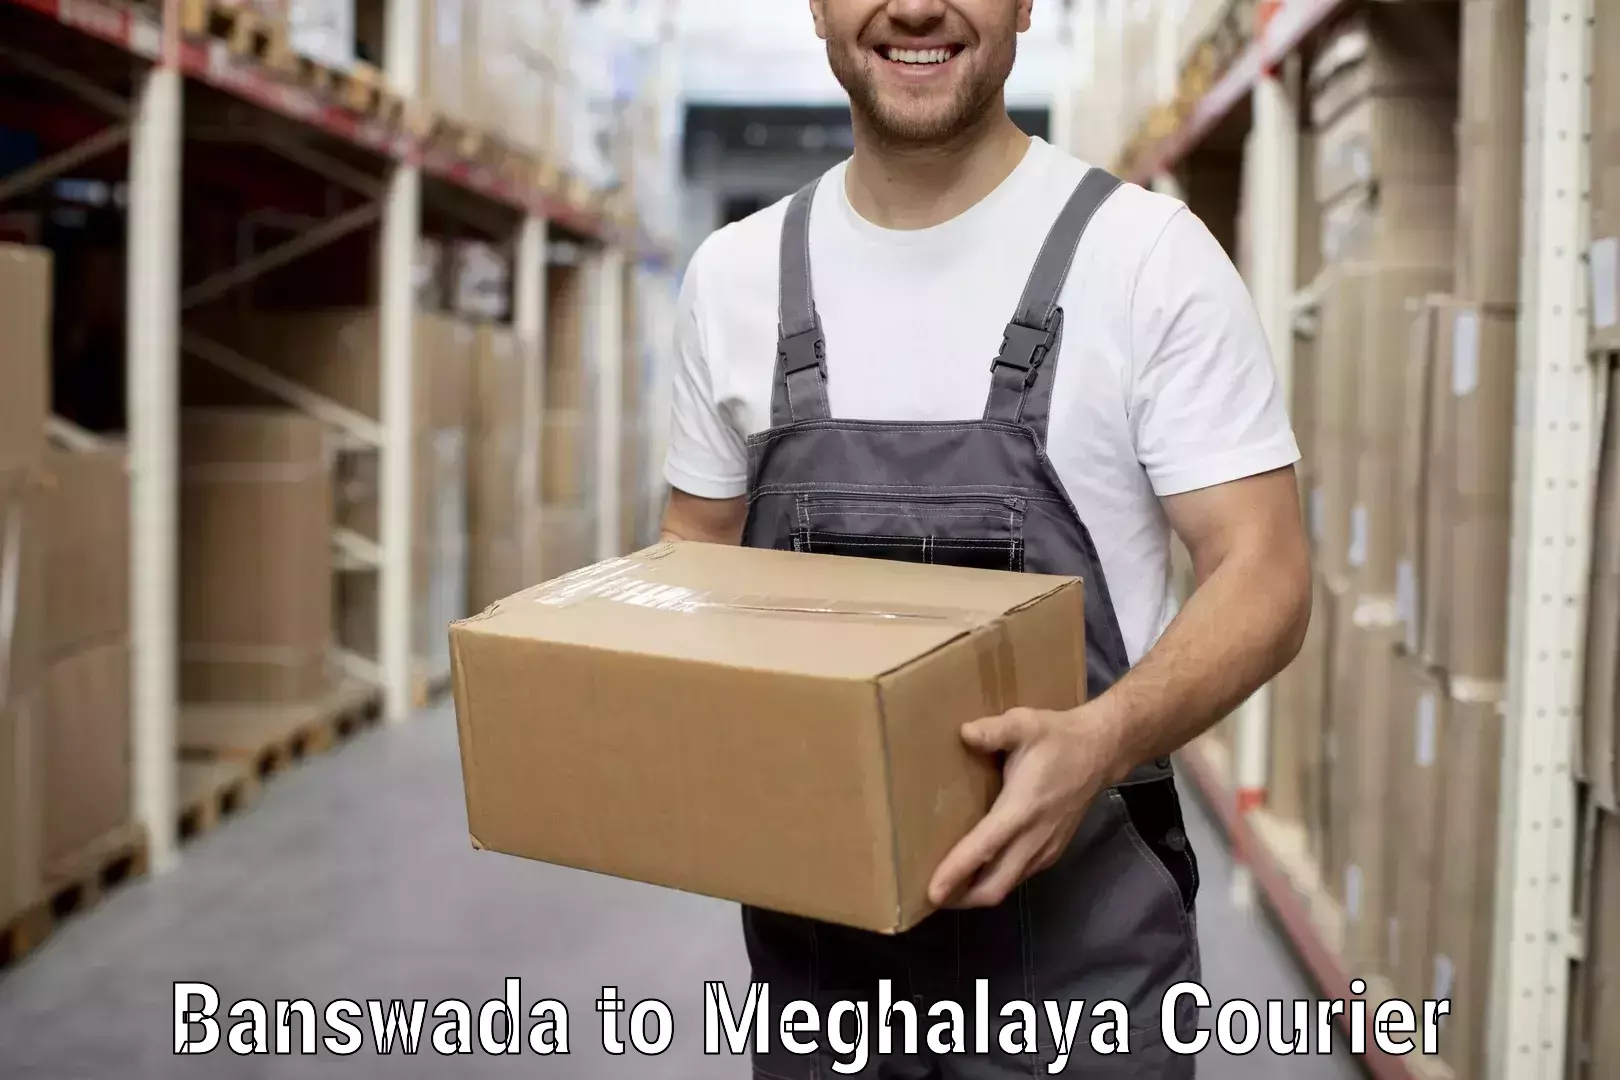 Trusted moving company in Banswada to Meghalaya